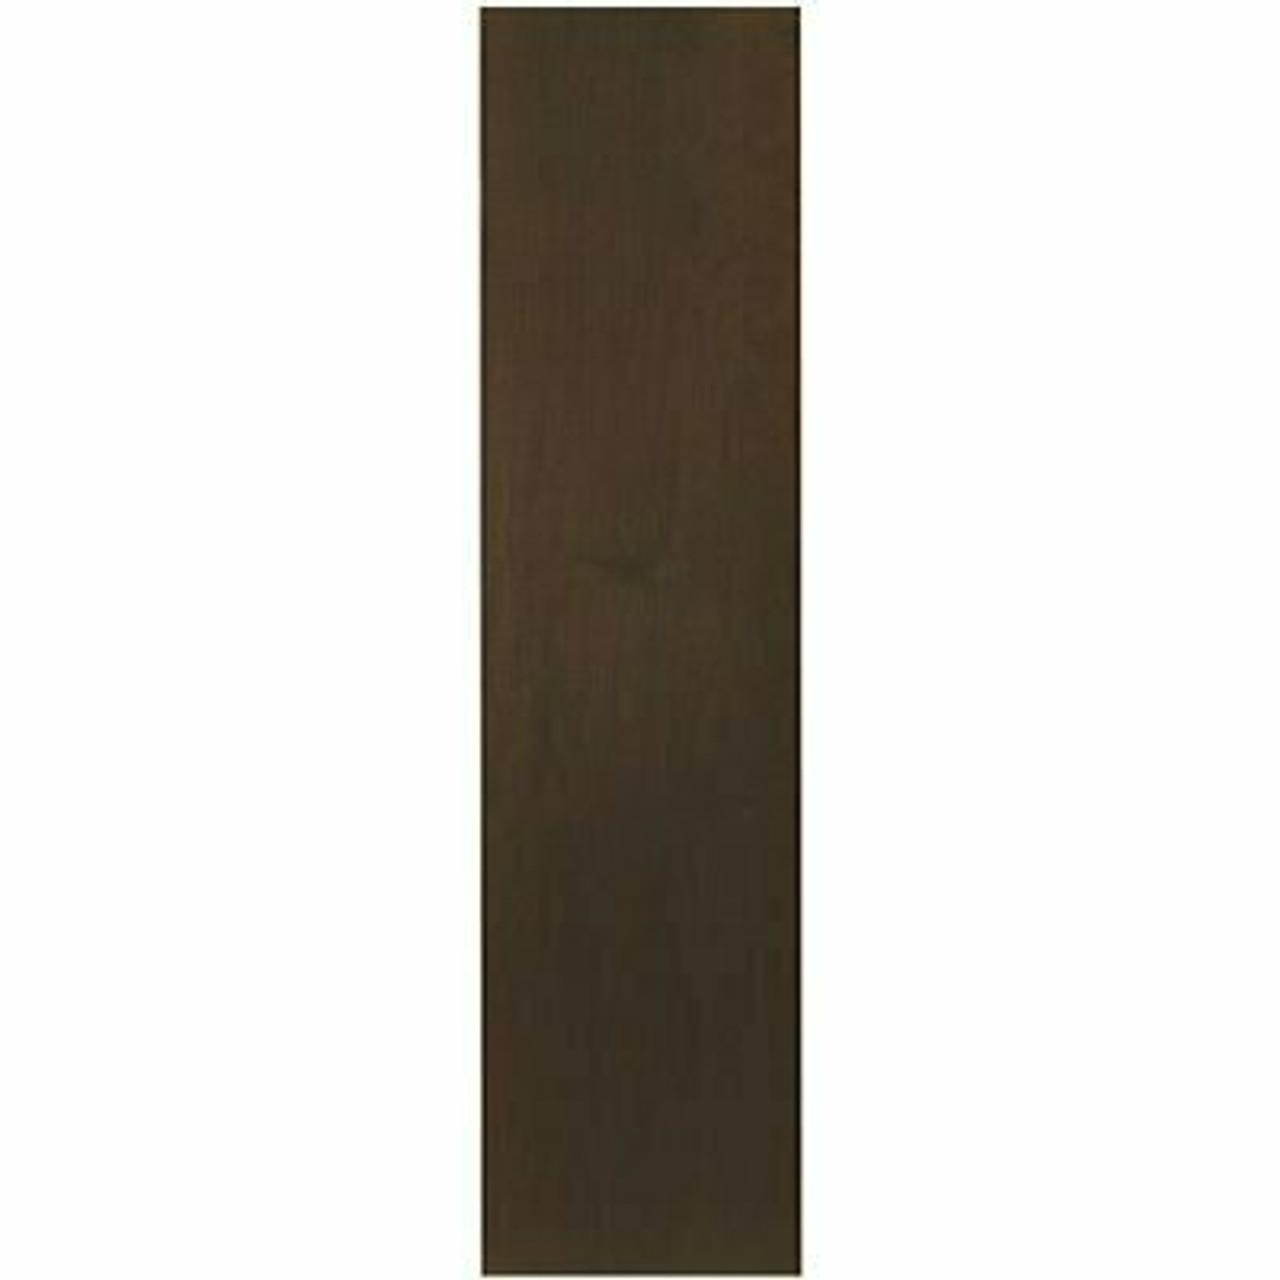 Hampton Bay 0.1875 in. X 42 in. X 11.25 in. Kitchen Cabinet End Panel